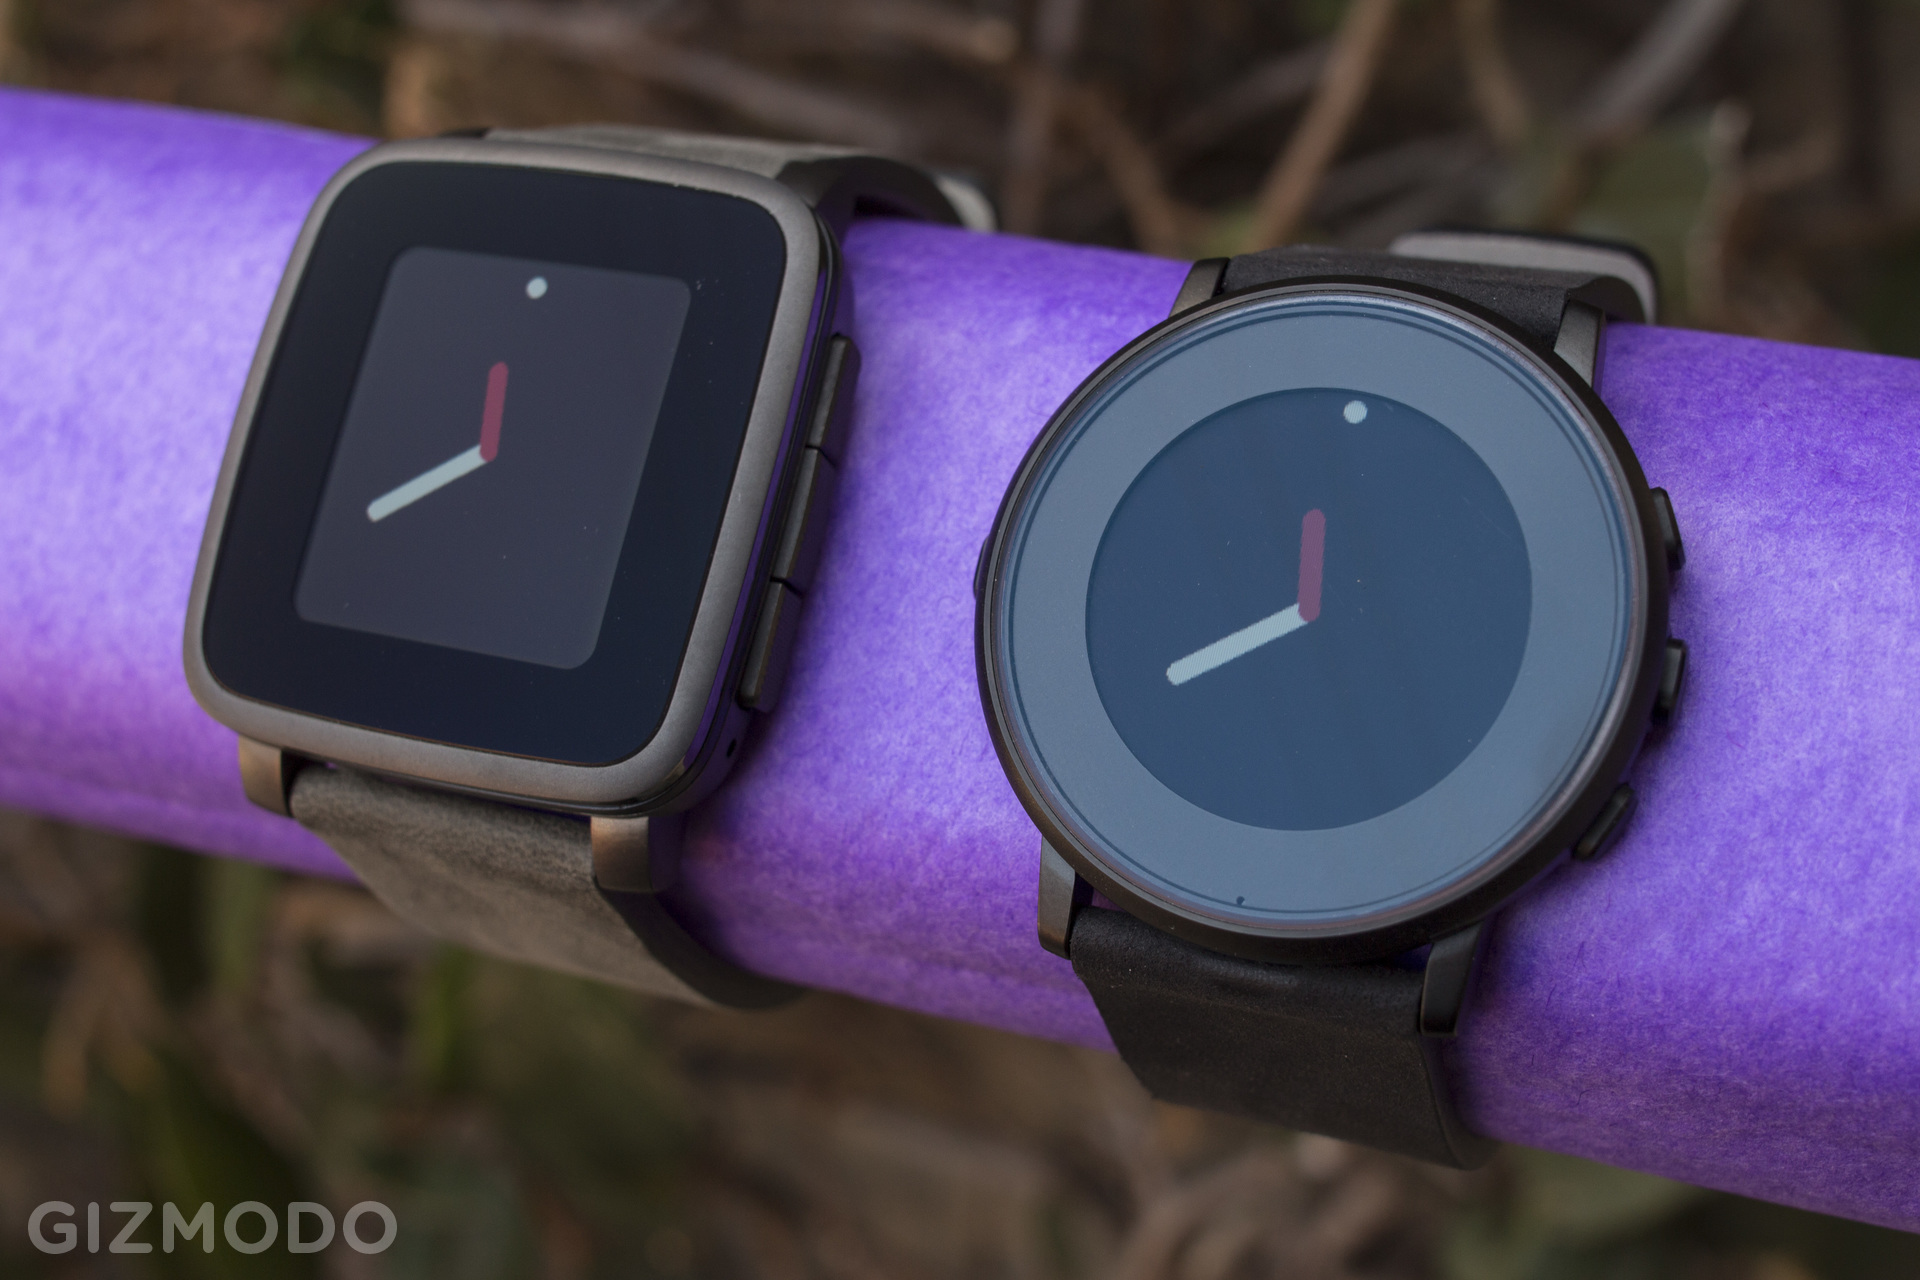 Pebble Time Round Hands On: A Smartwatch For People Who Don’t Like Smartwatches